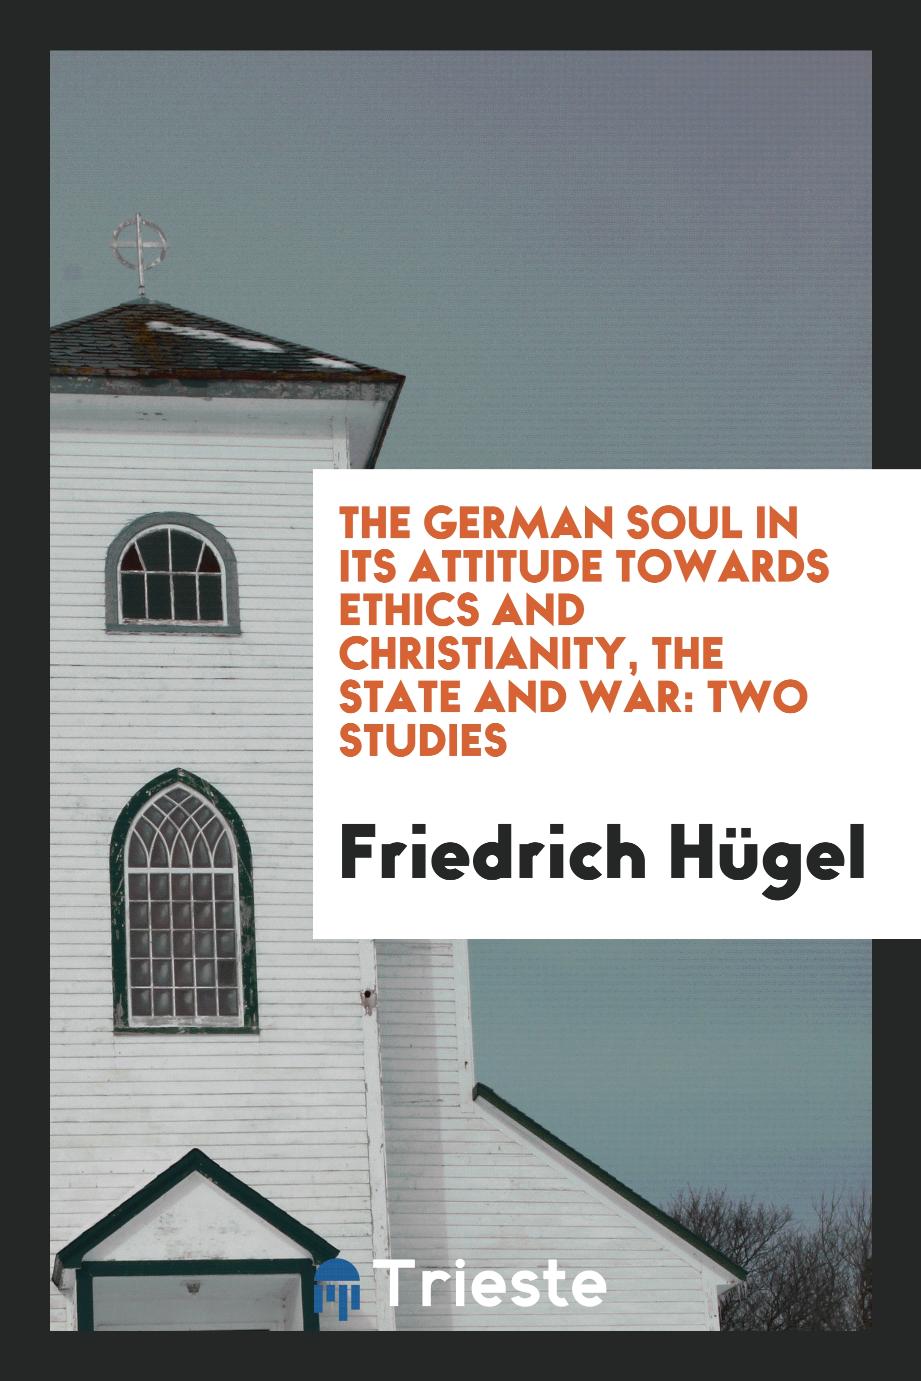 The German soul in its attitude towards ethics and Christianity, the state and war: two studies